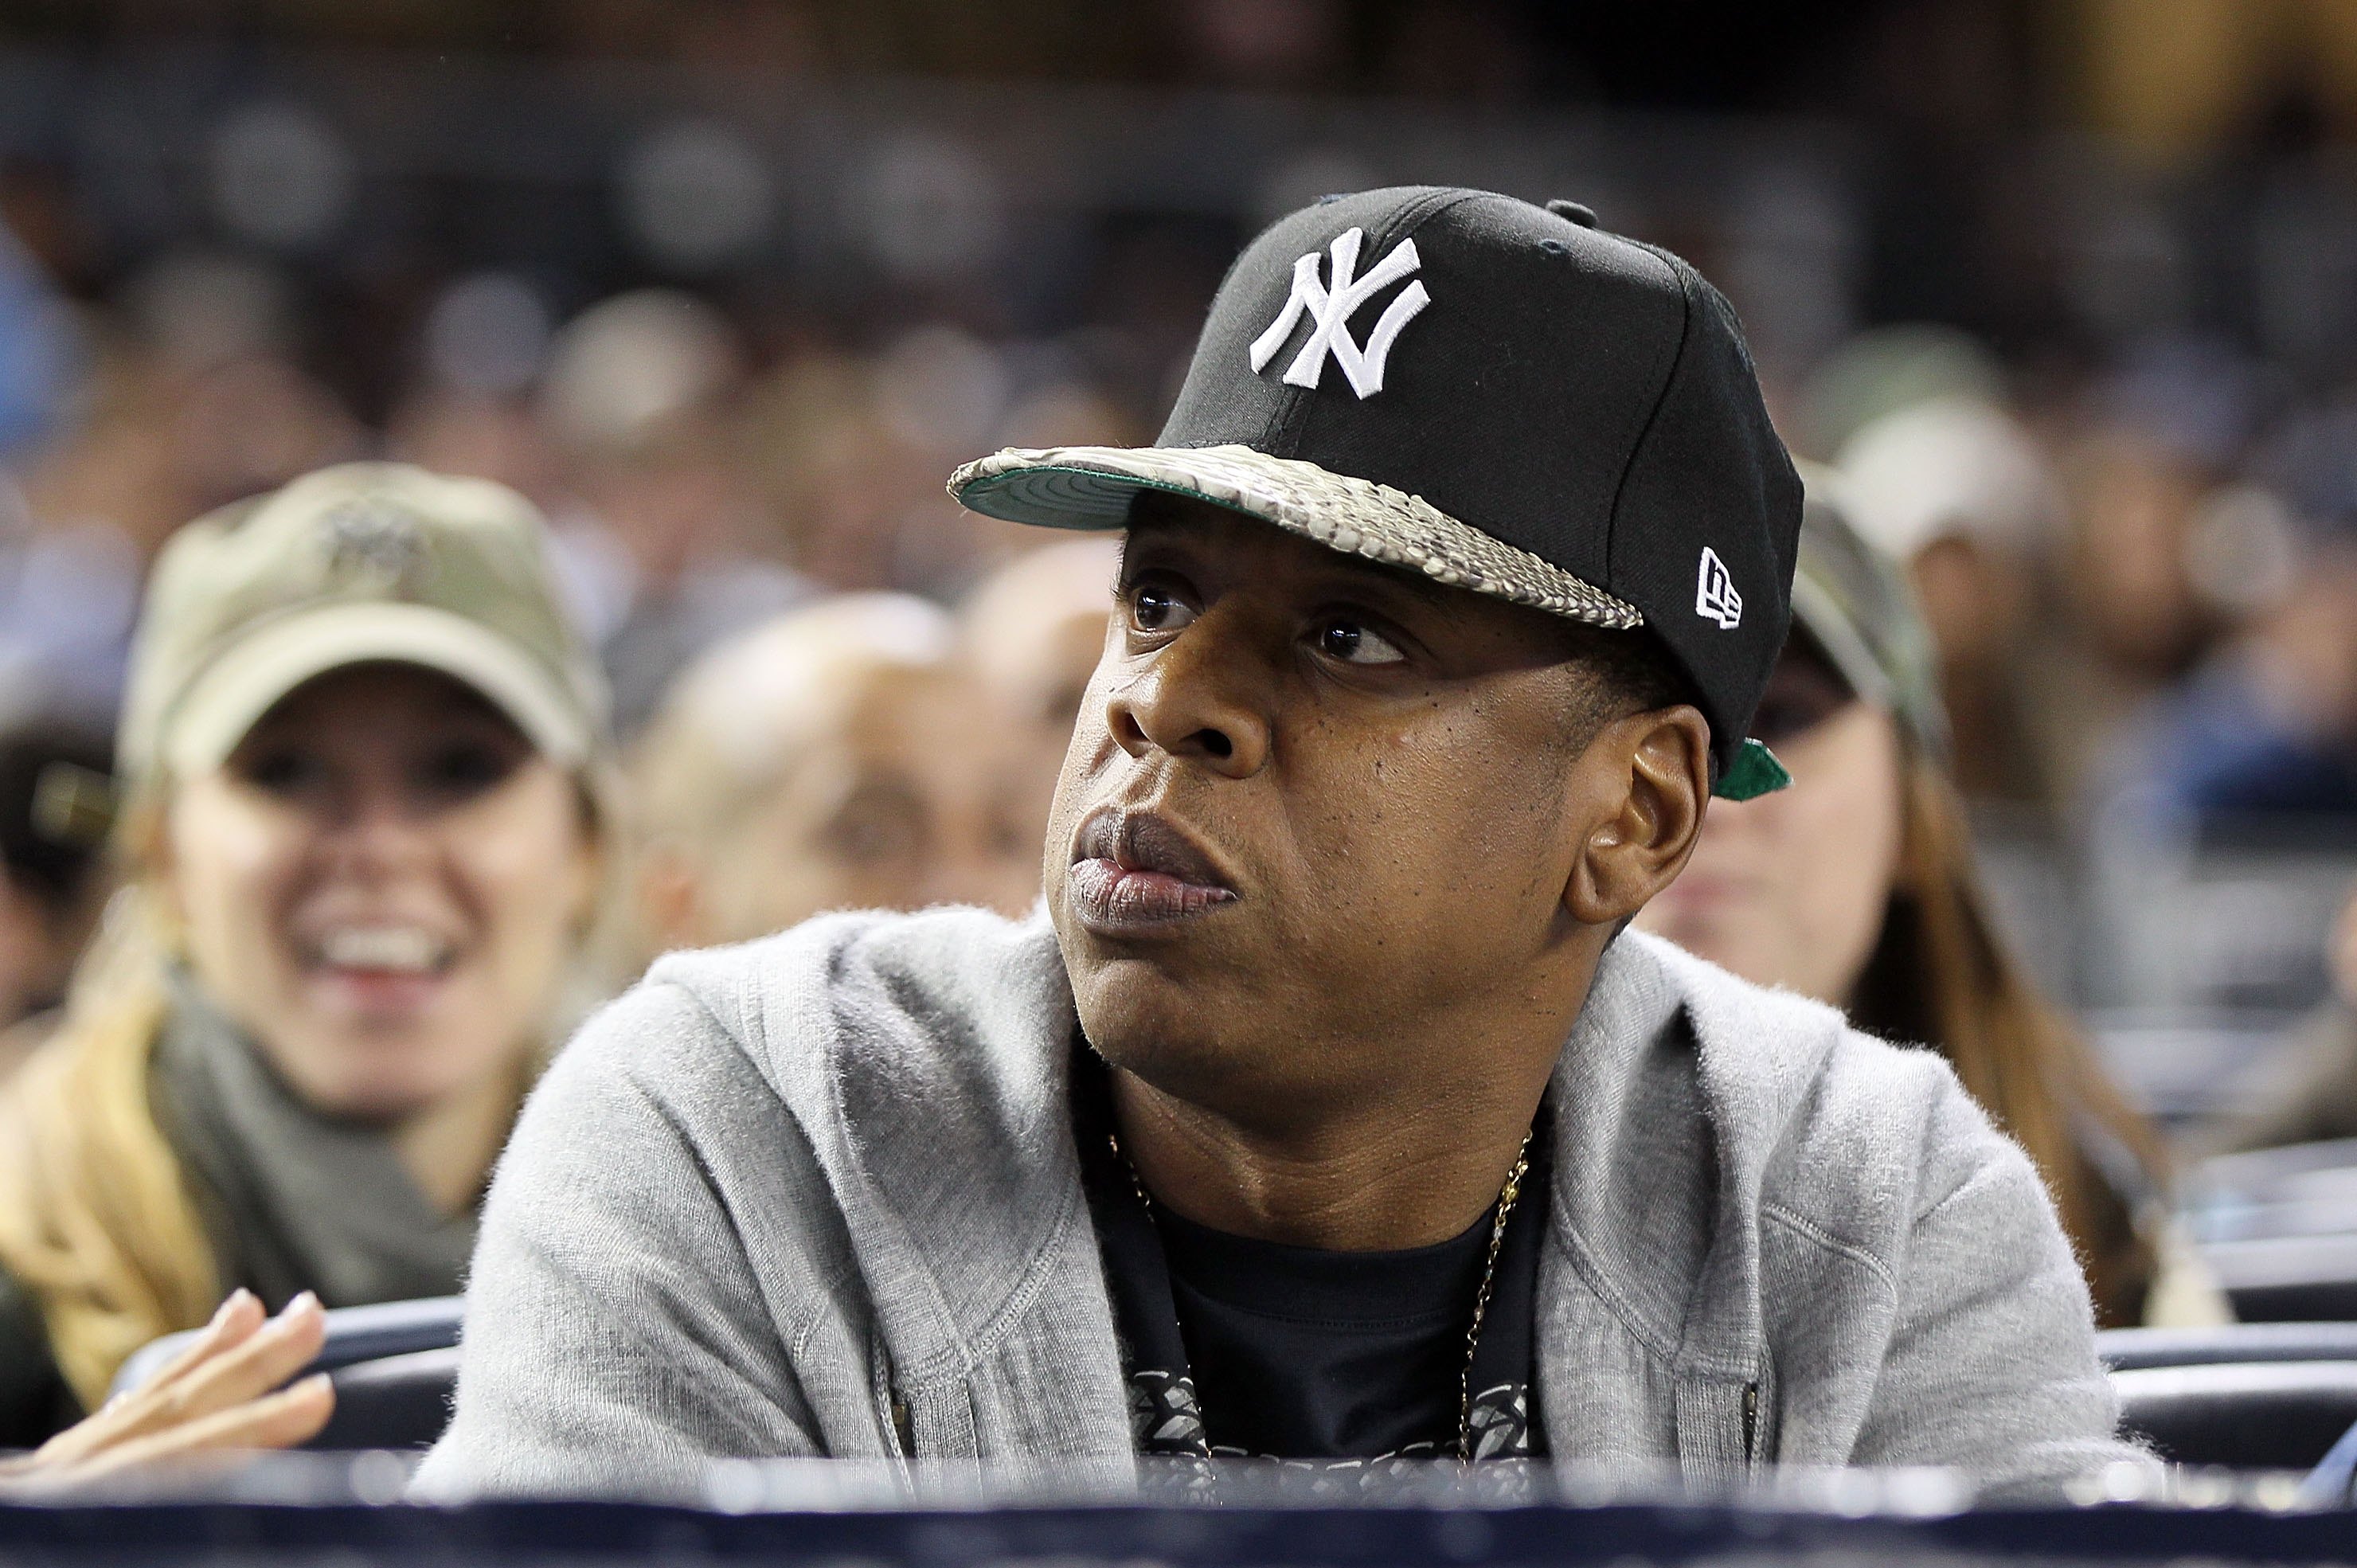 Jay Z News, Highlights, Rumors on | Putting for MLB and Roc Bleacher Report Sued Nation Apparel Scores, Official Stats, Logo 